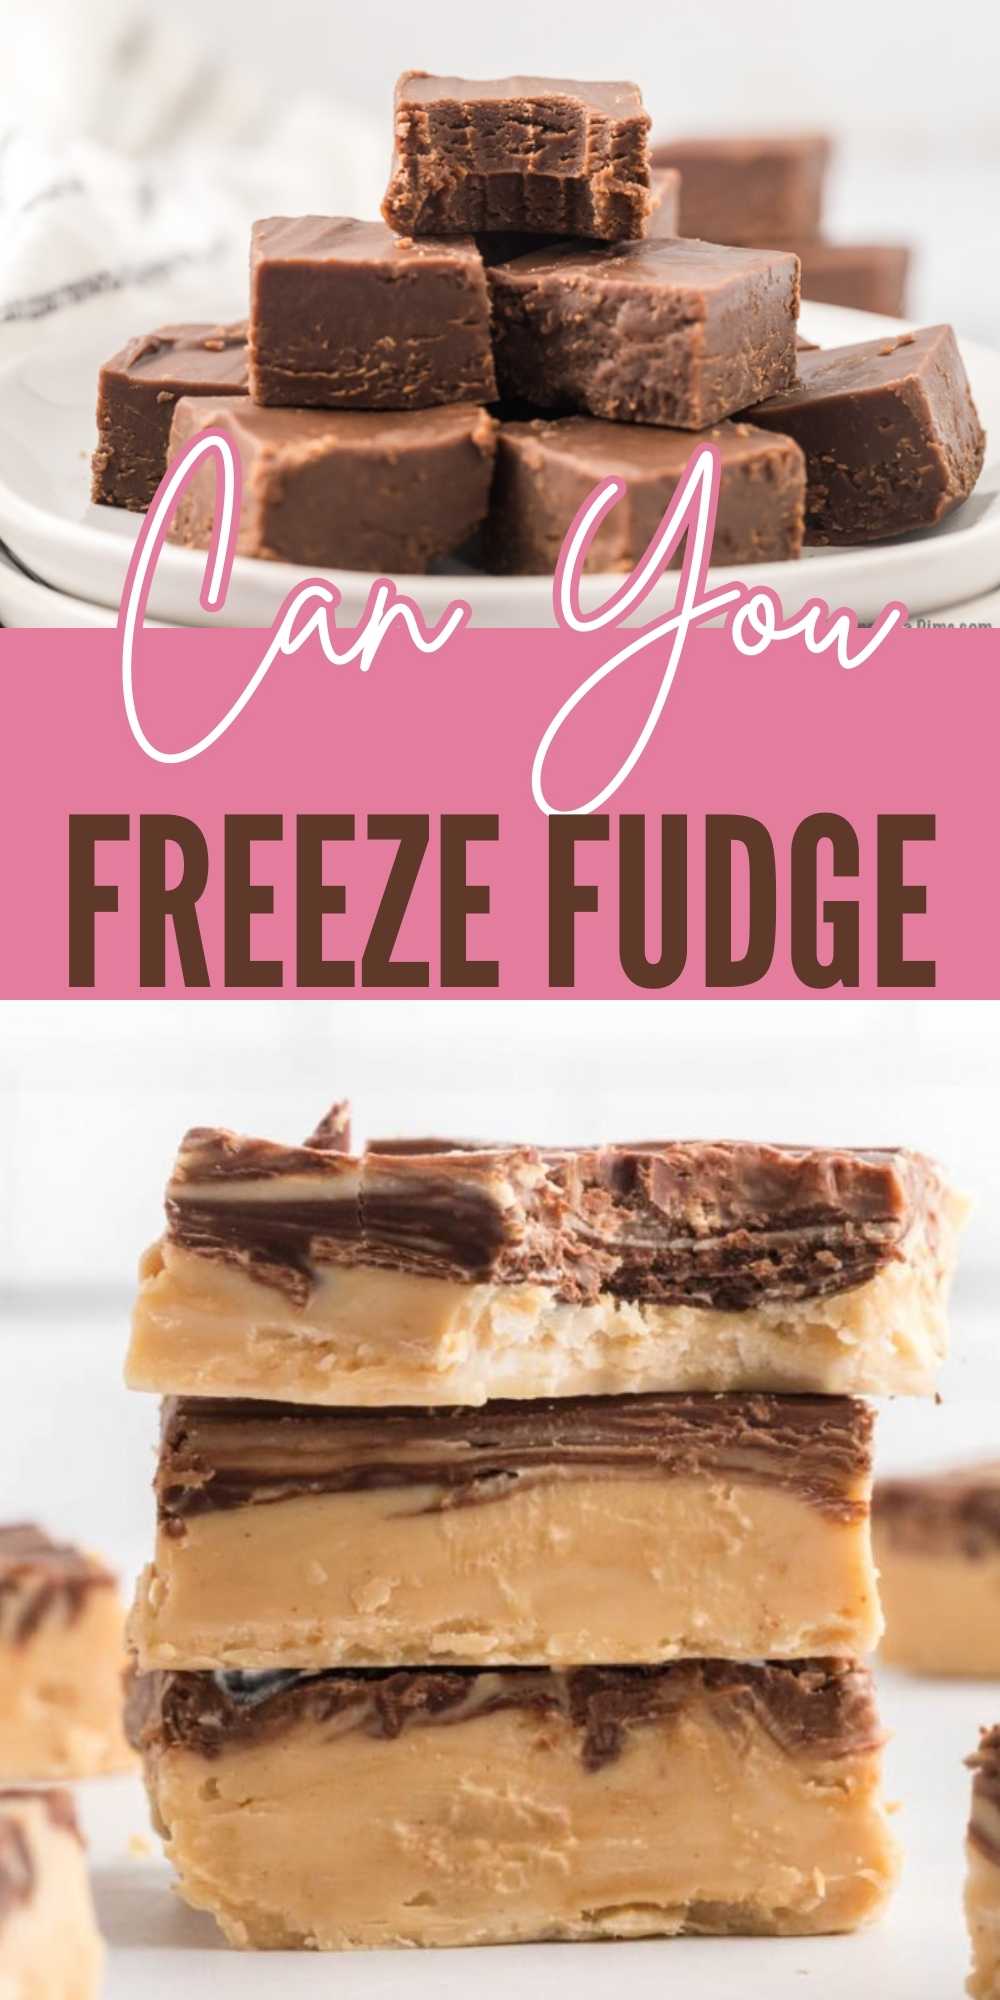 If you have wondered, can you freeze fudge we have all the tips to properly freeze your favorite dessert. Lean how to here on freezing fudge. In this step by step guide, we'll explore the ins and outs of freezing fudge. Including the proper steps to preserve its texture and taste. #eatingonadime #canyoufreezefudge #fudgefreezingtips